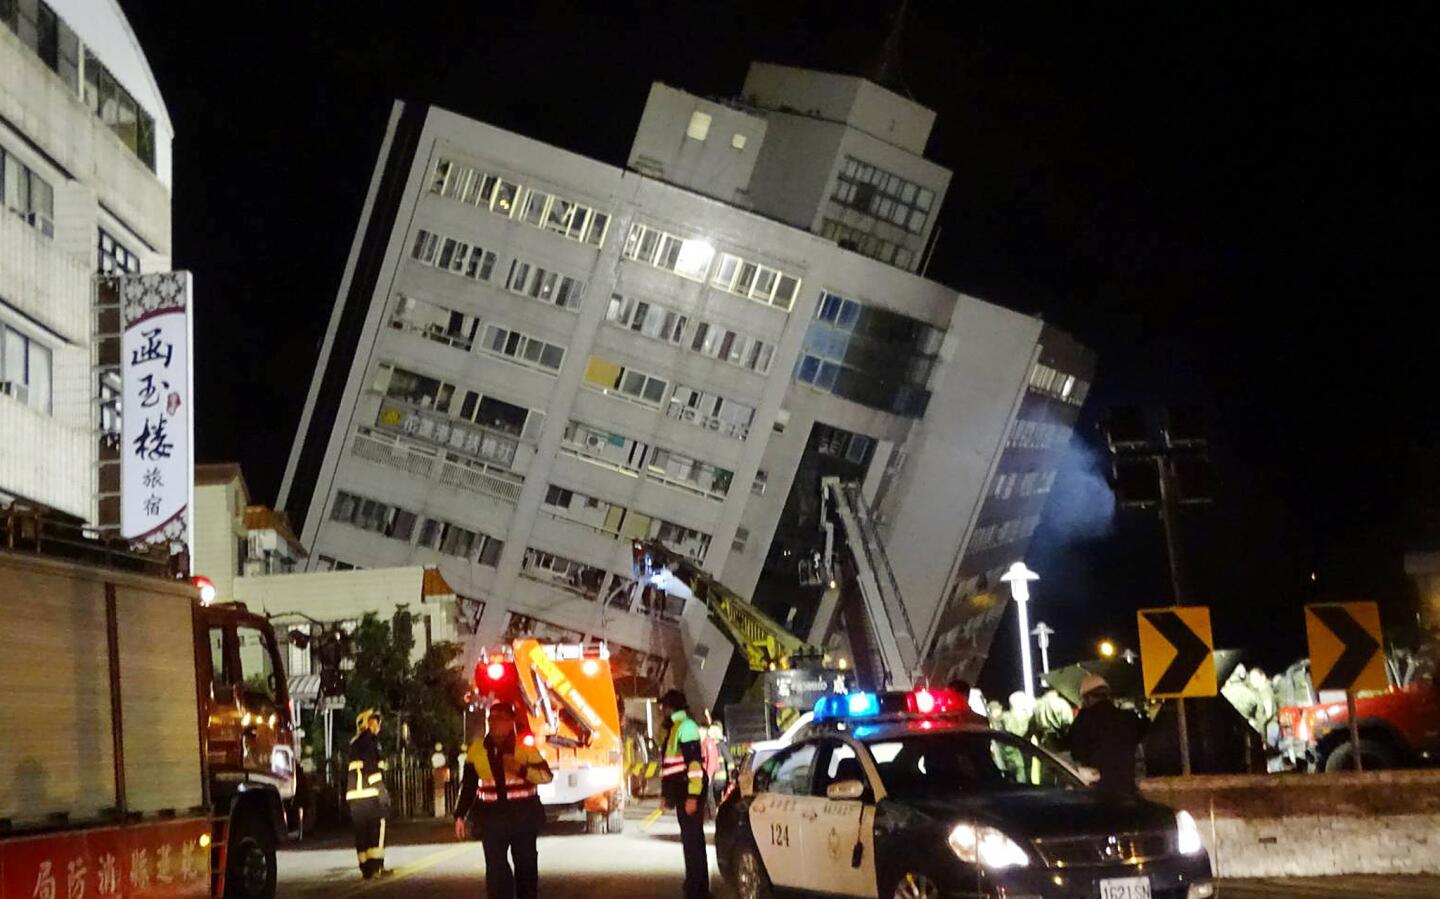 Rescuers are seen entering a building that collapsed onto its side from a 6.4 magnitude earthquake in Hualien County, eastern Taiwan, on Feb. 7, 2018.